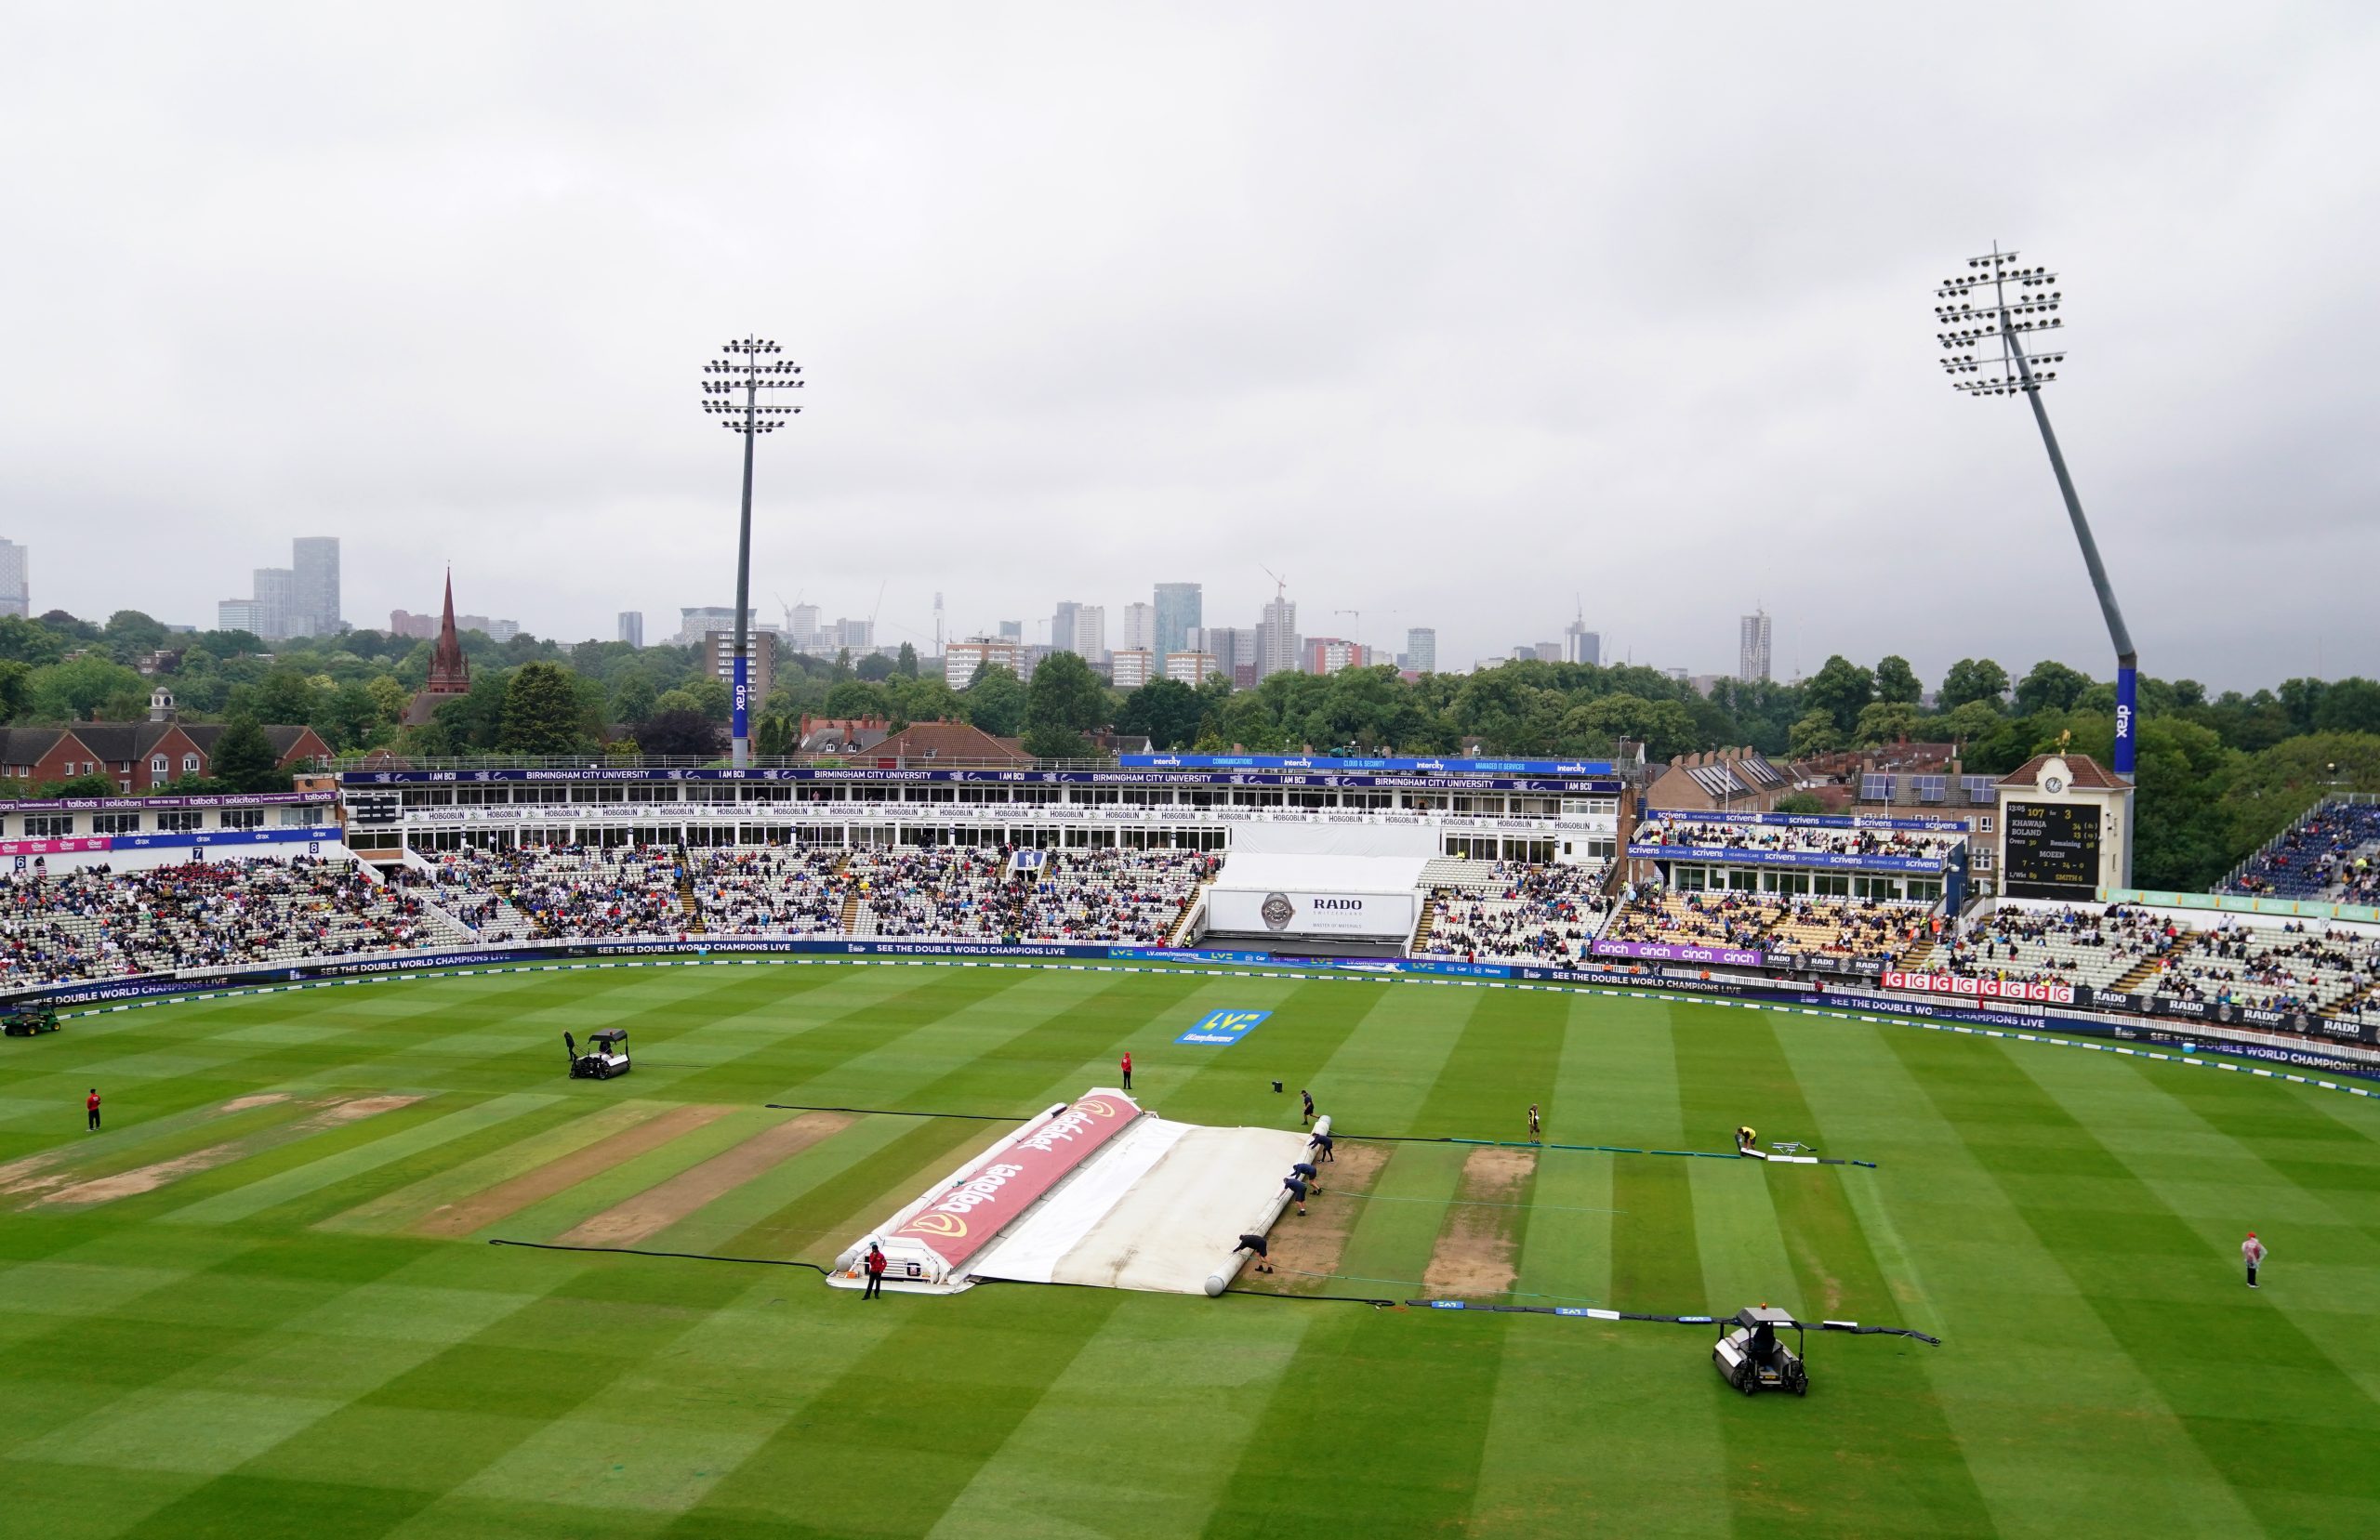 Final day of first Ashes Test under way after morning rain at Edgbaston